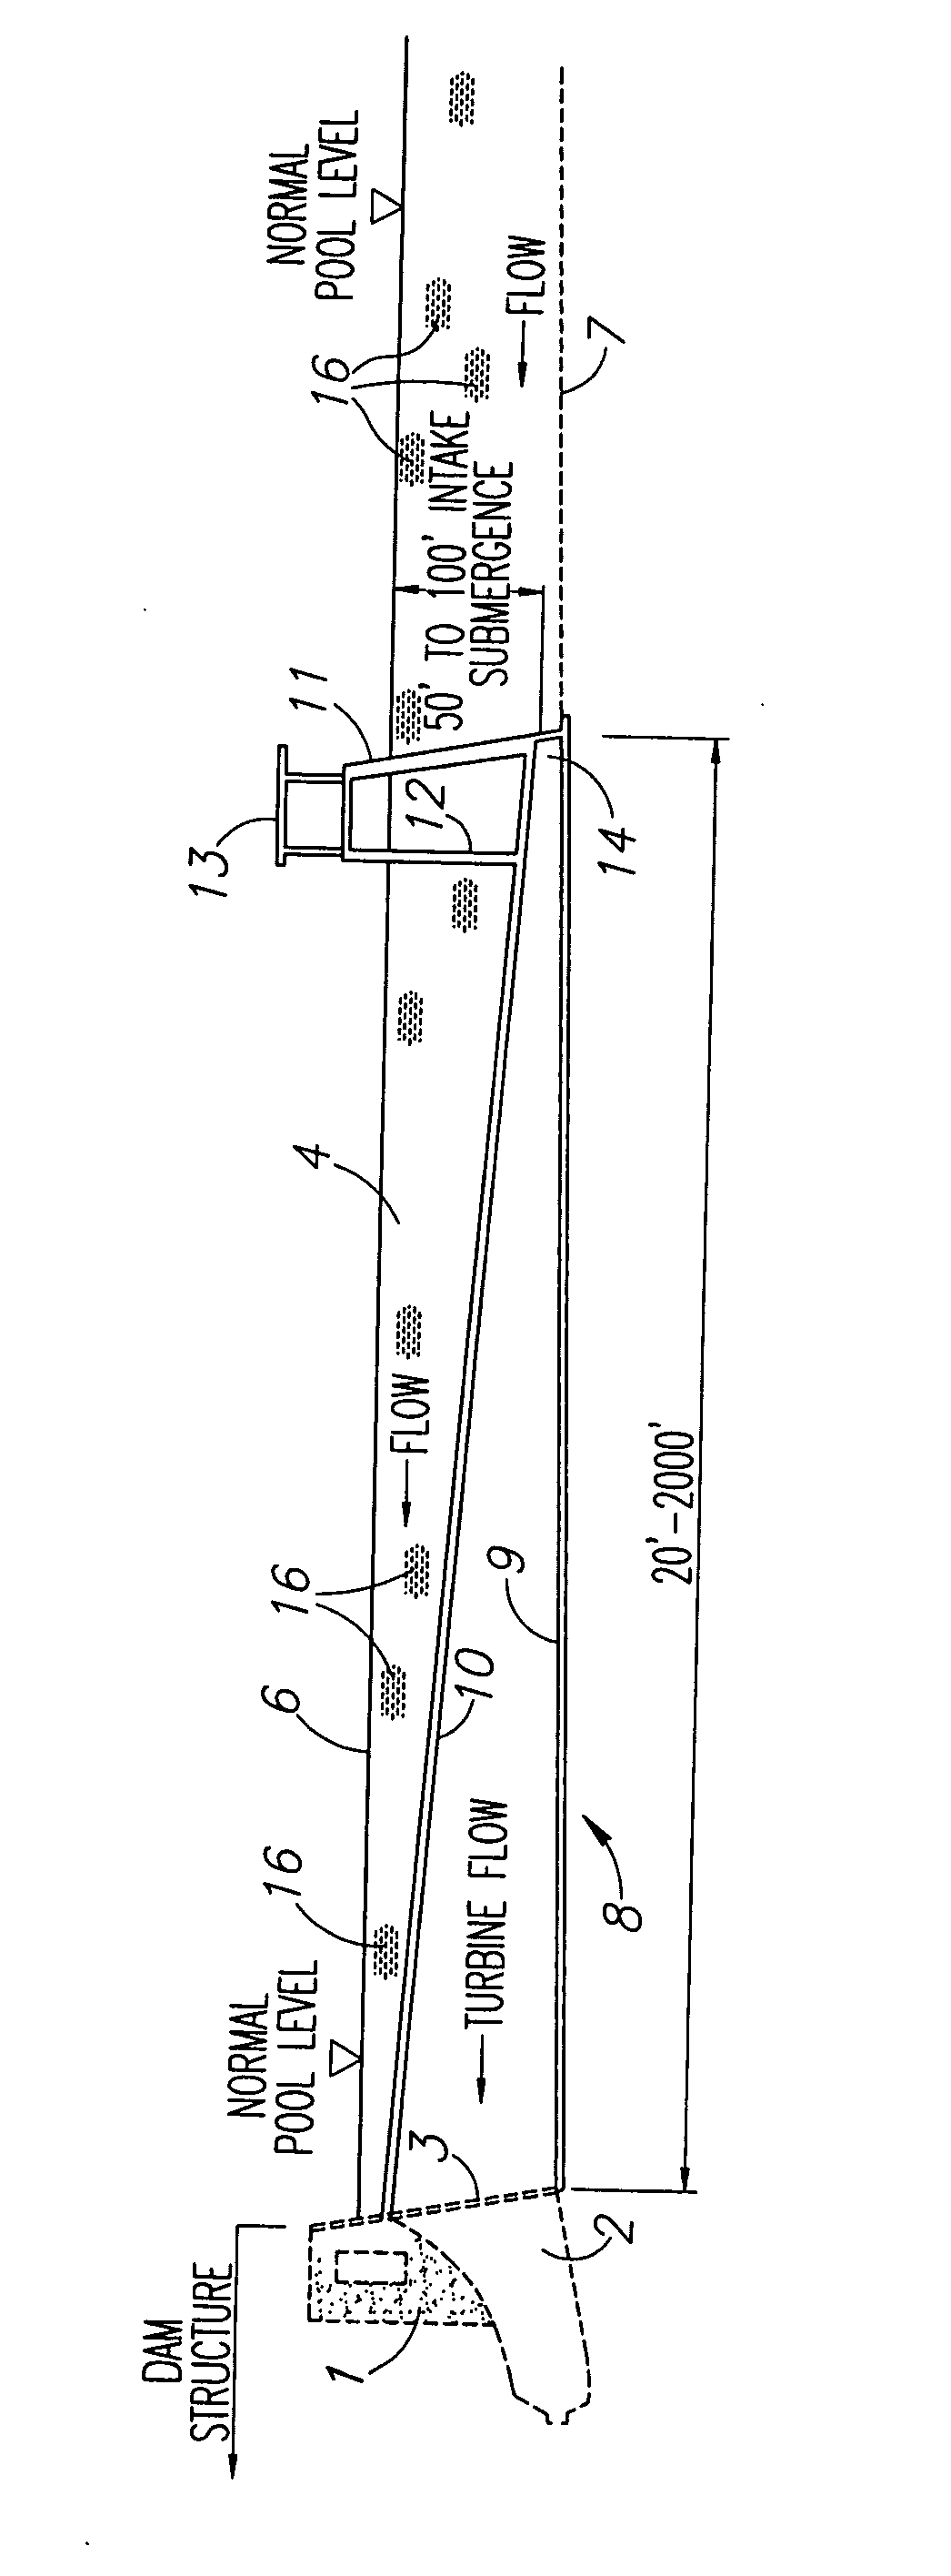 Structure and method for facilitating safe downstream passage of migrating fish around hydroelectric projects